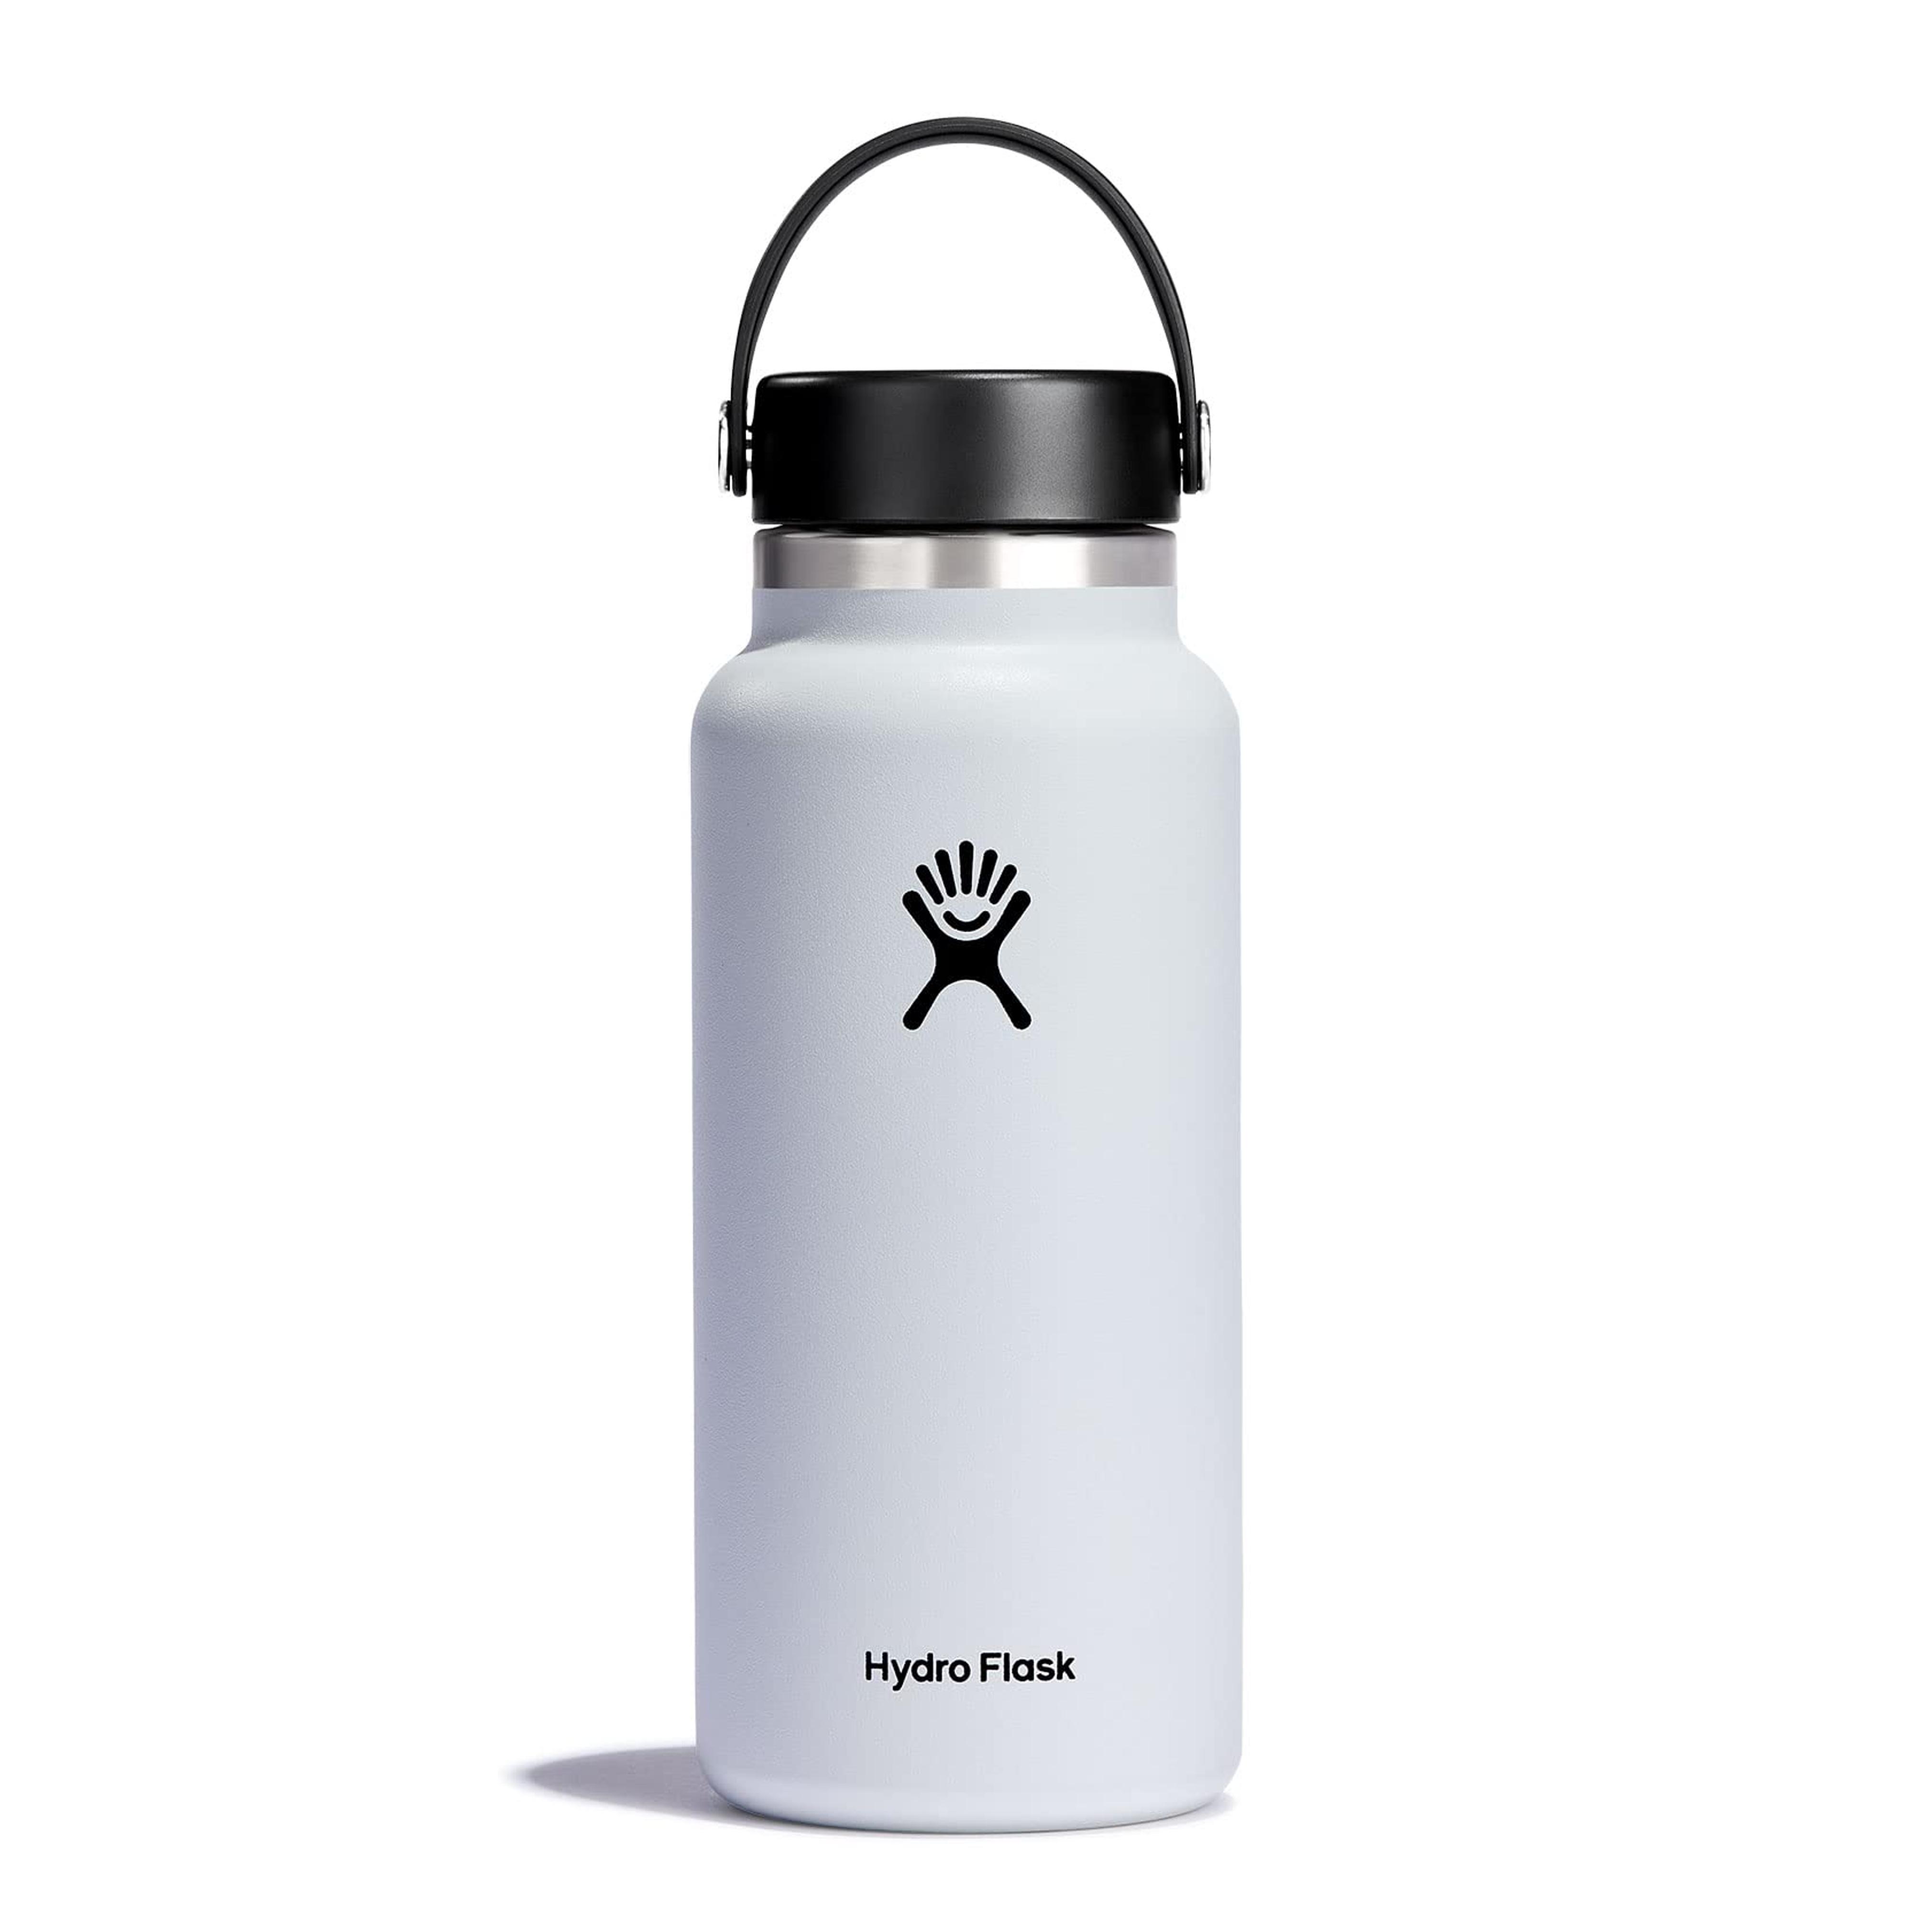 Amazon.com : Hydro Flask Wide Mouth Bottle with Flex Cap : Sports & Outdoors